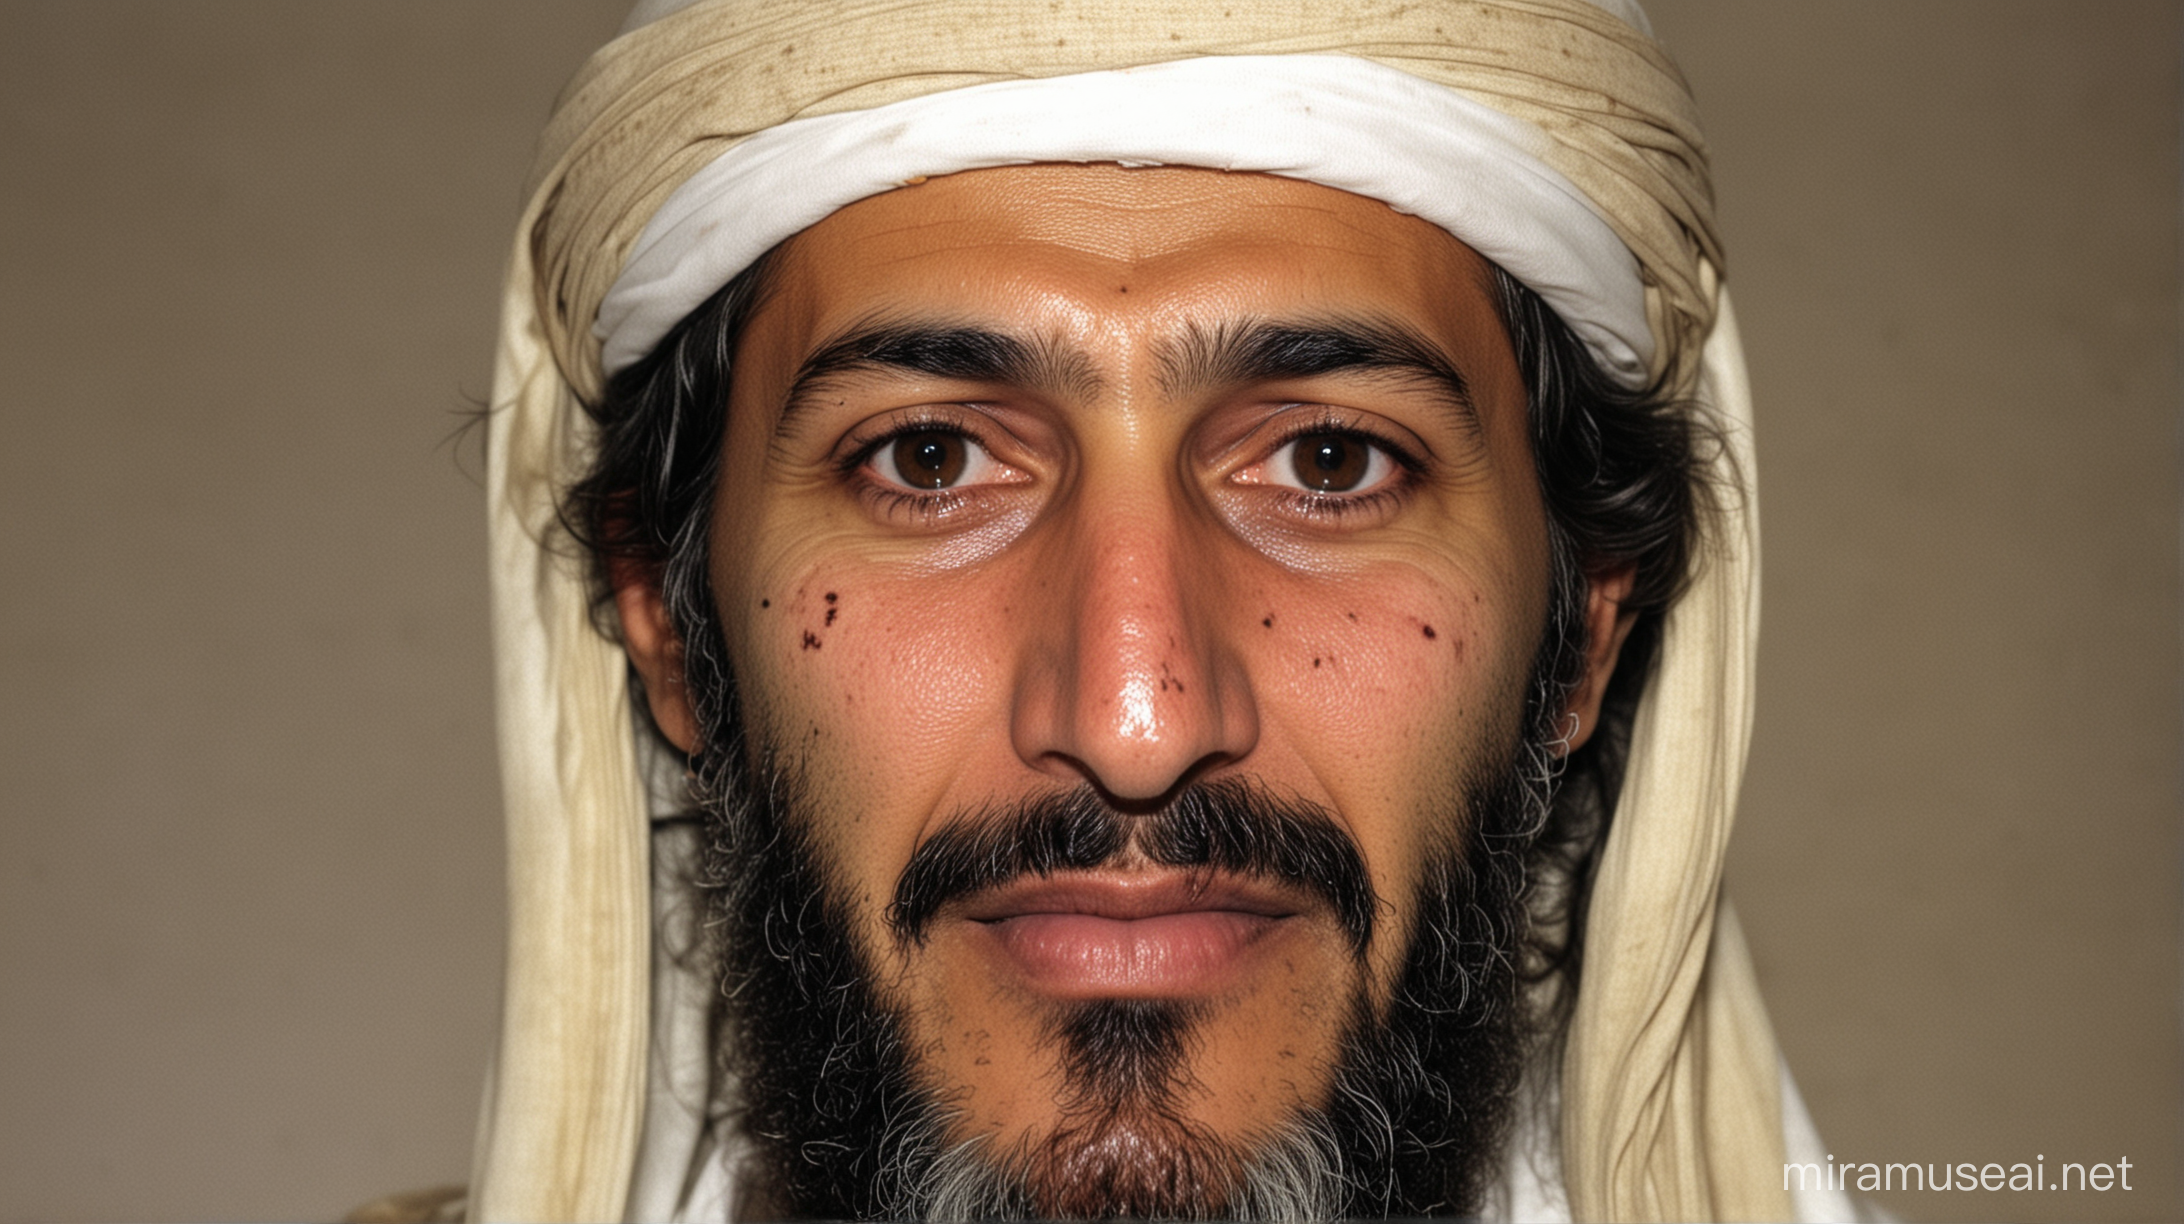 fatally injured and bruised osama bin laden during airstrike attack